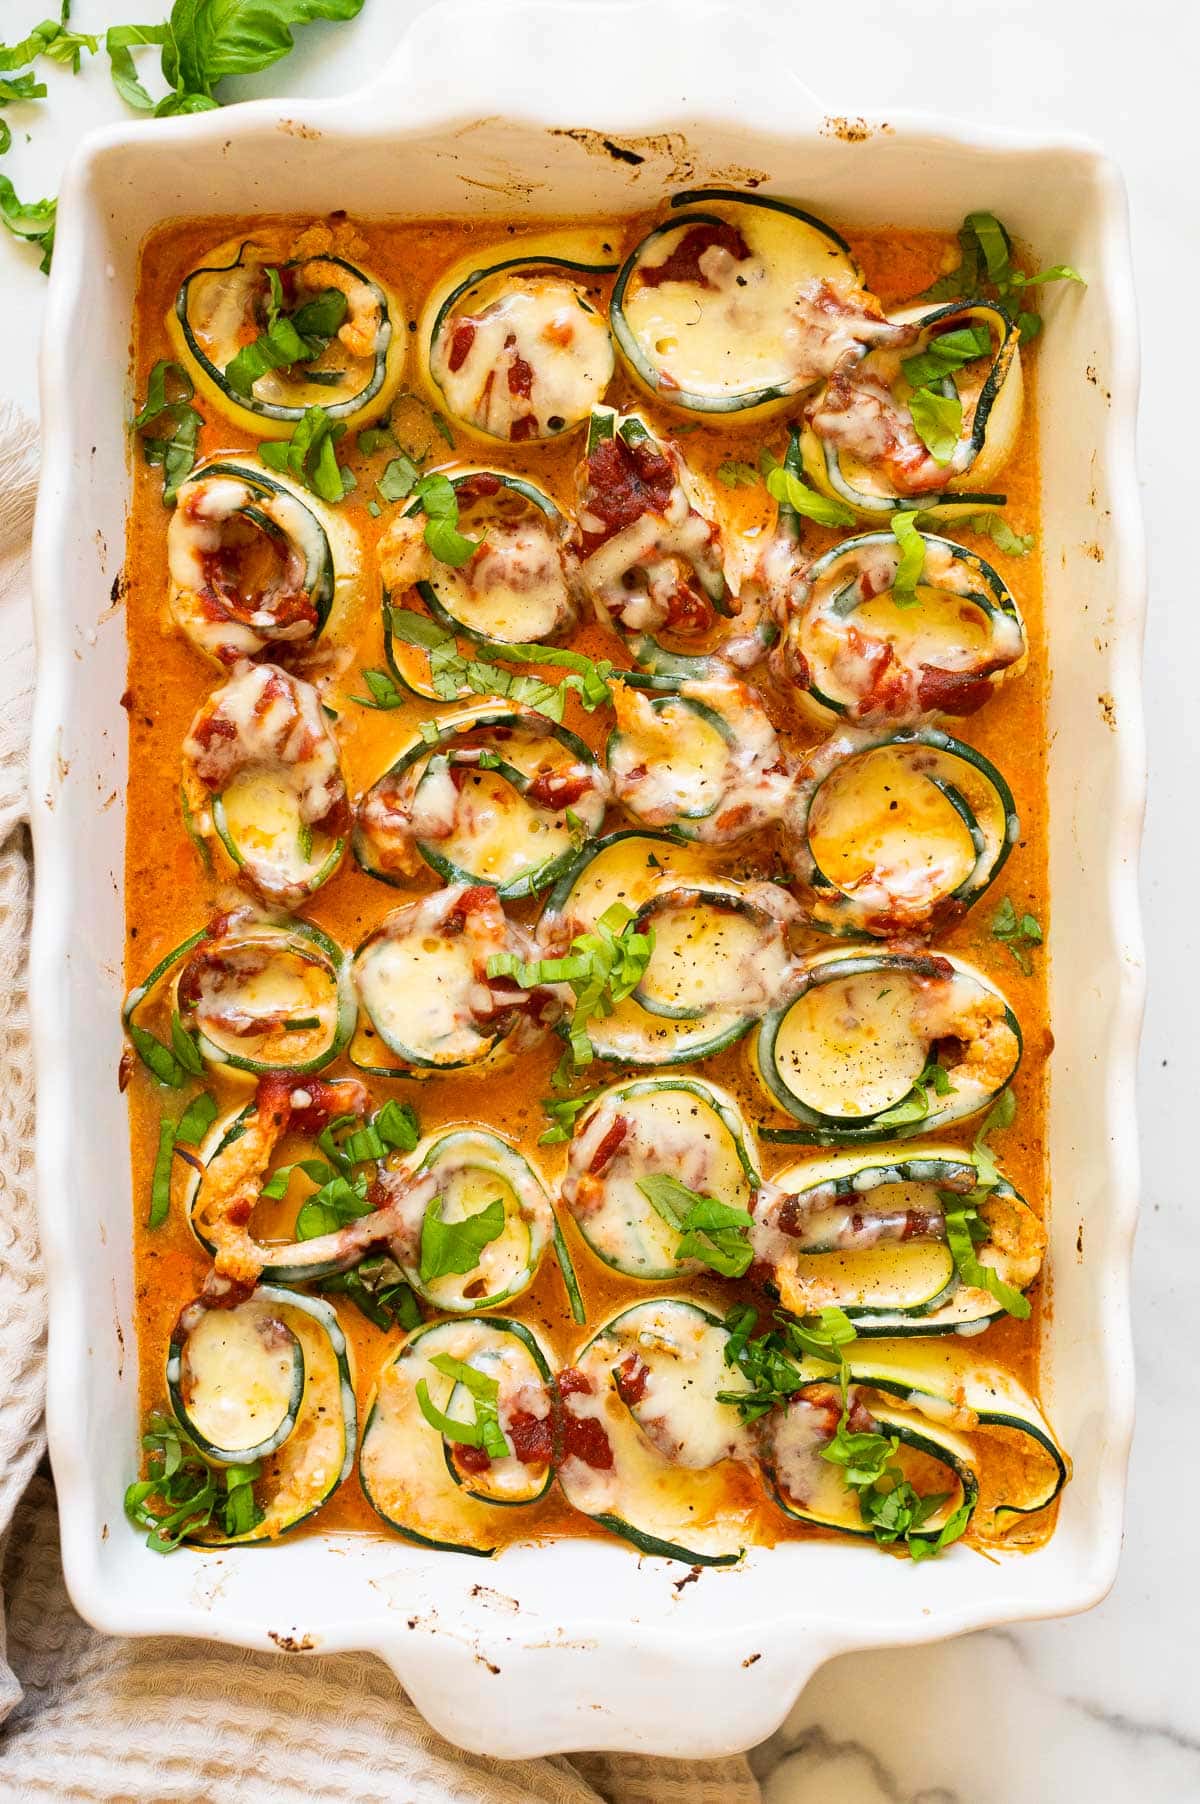 Zucchini lasagna roll-ups arranged in a baking pan with sauce and garnished with basil.